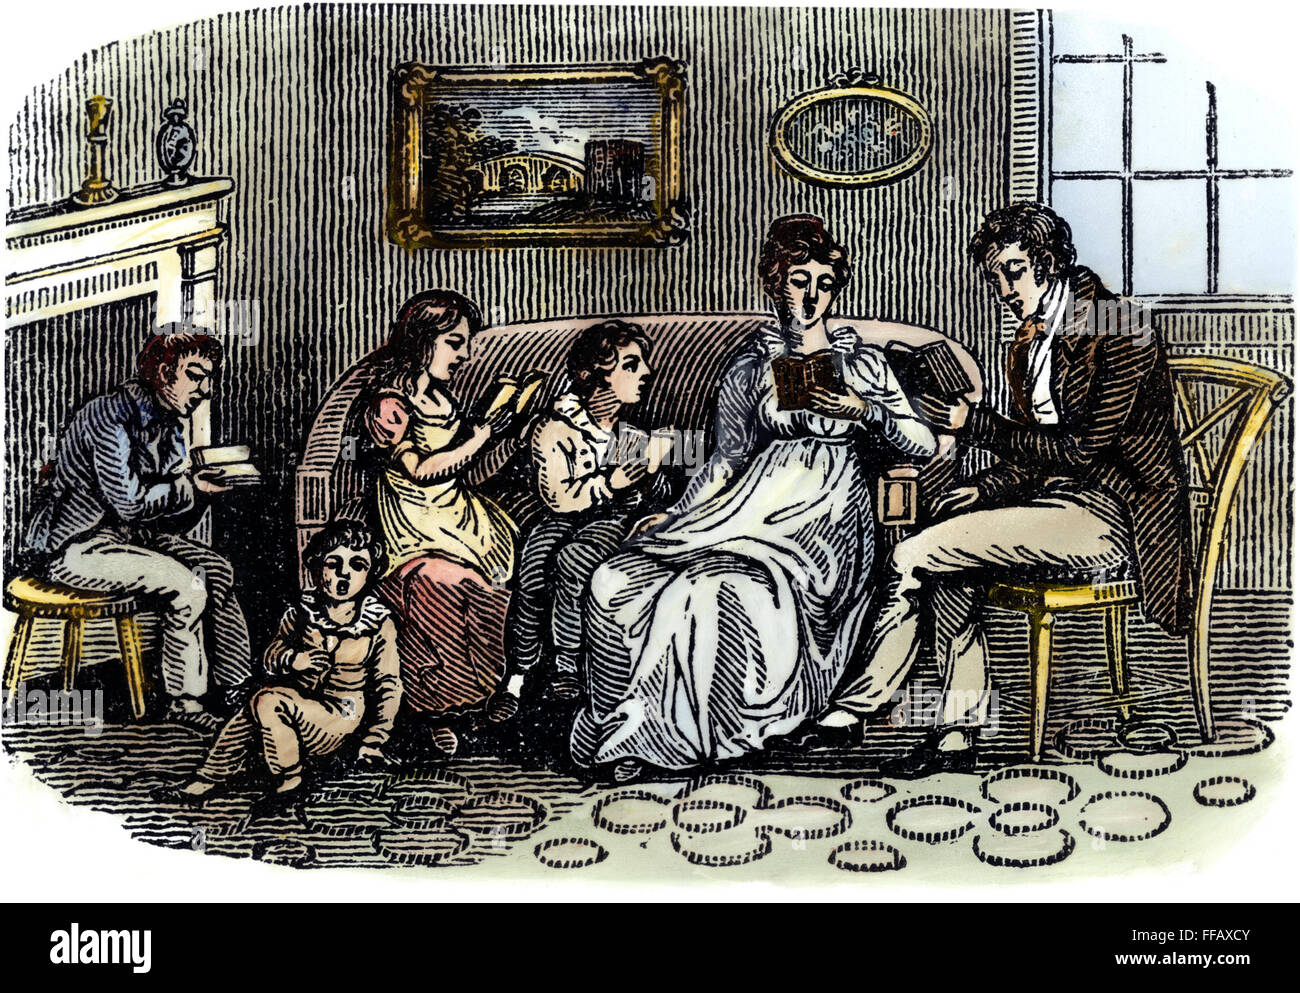 FAMILY: READING, 1800. /nA family reading together: colored wood engraving, American, c1800. Stock Photo